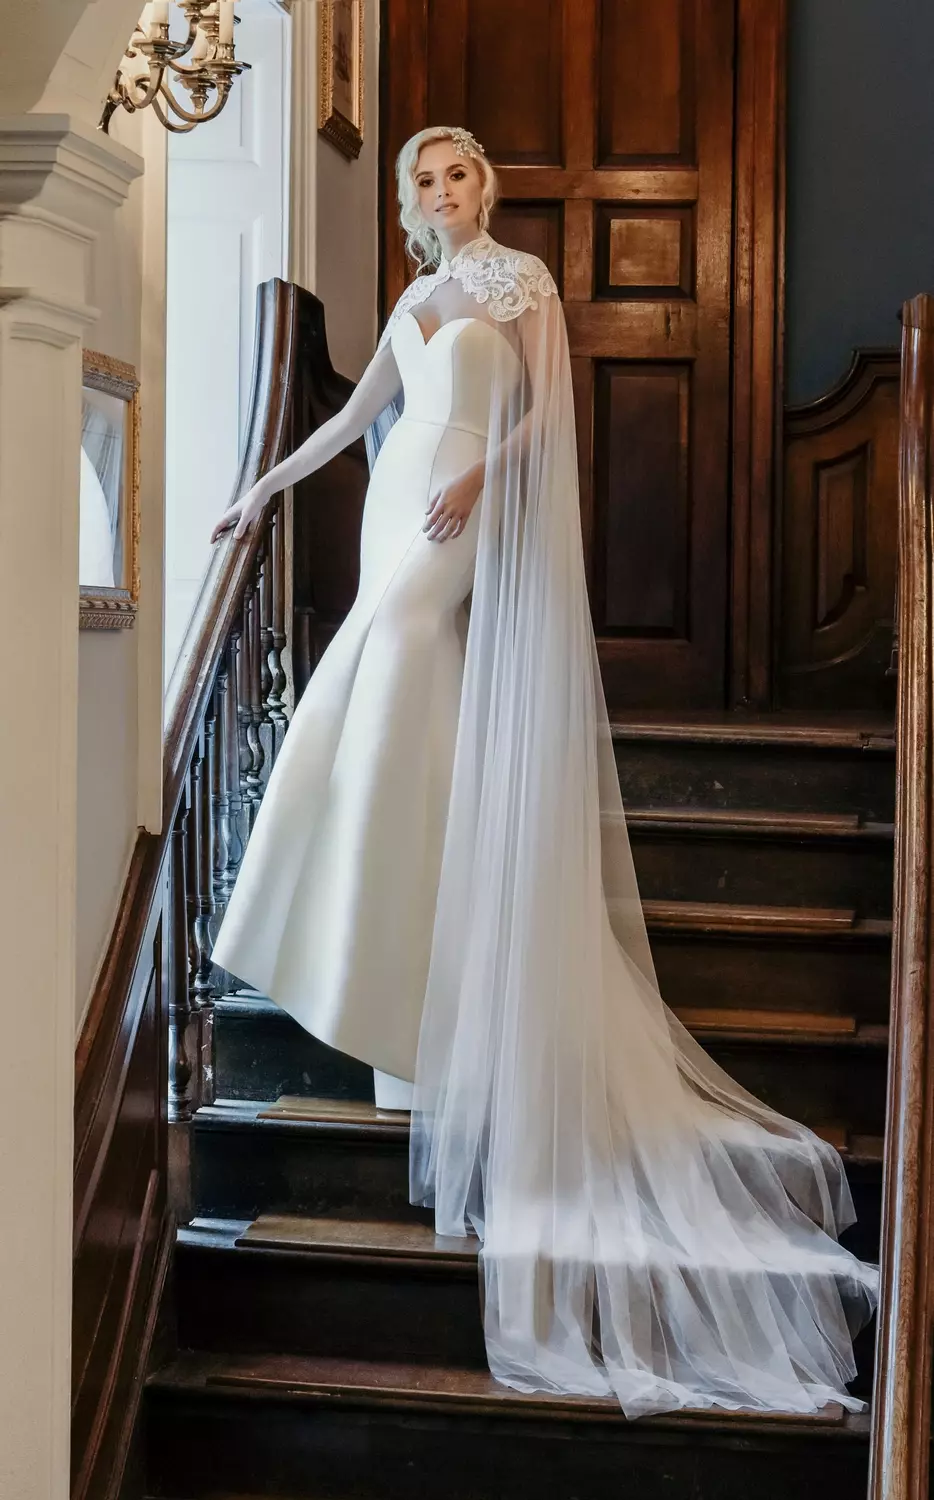 Plain strapless fishtail wedding dress with lace and tulle cape